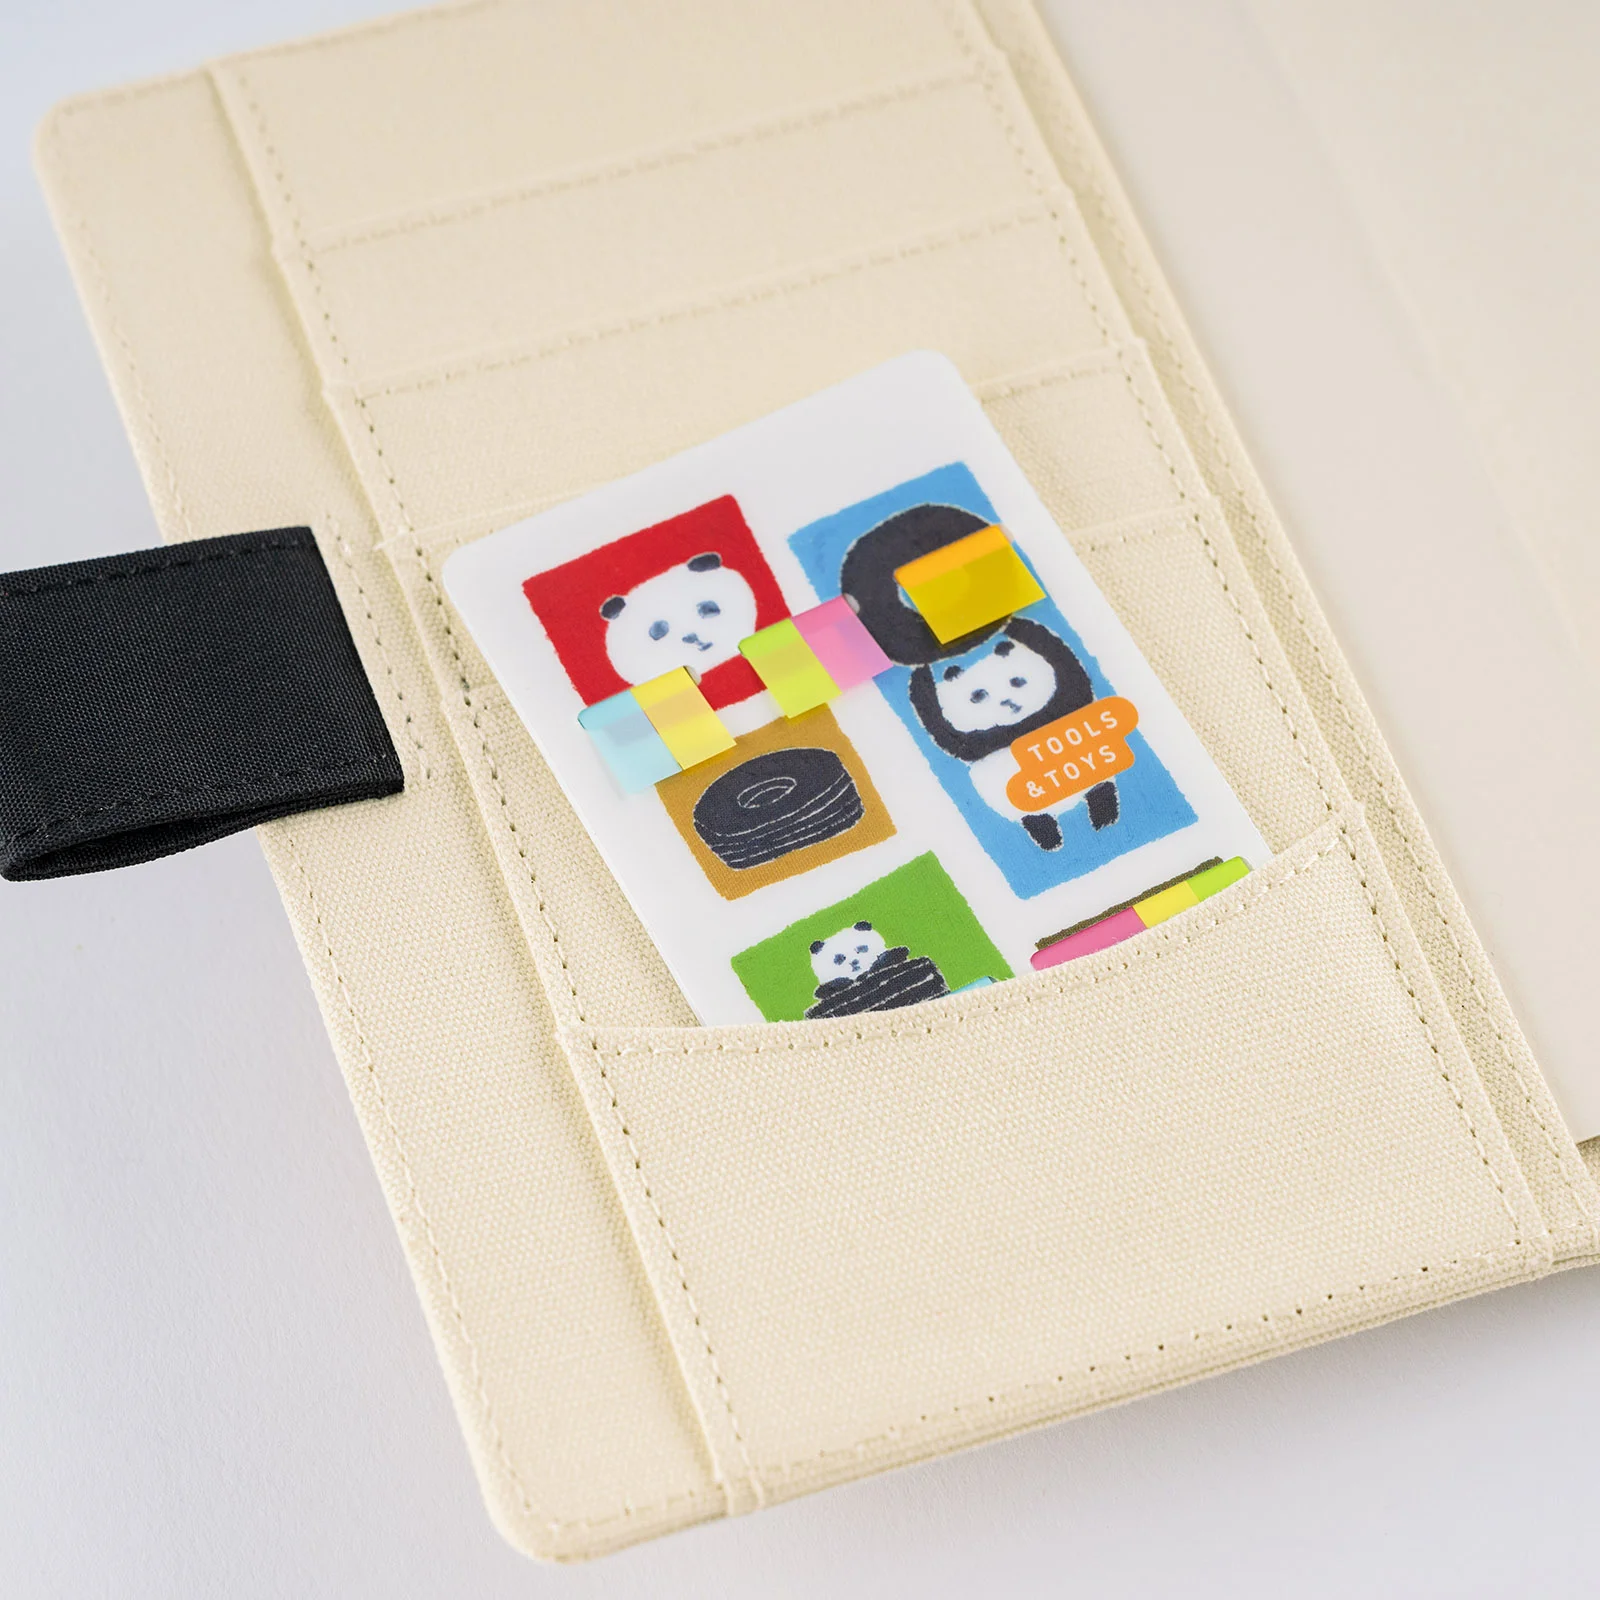 Hobonichi Accessories Anything Pocket – Take Note Pens & Stationery